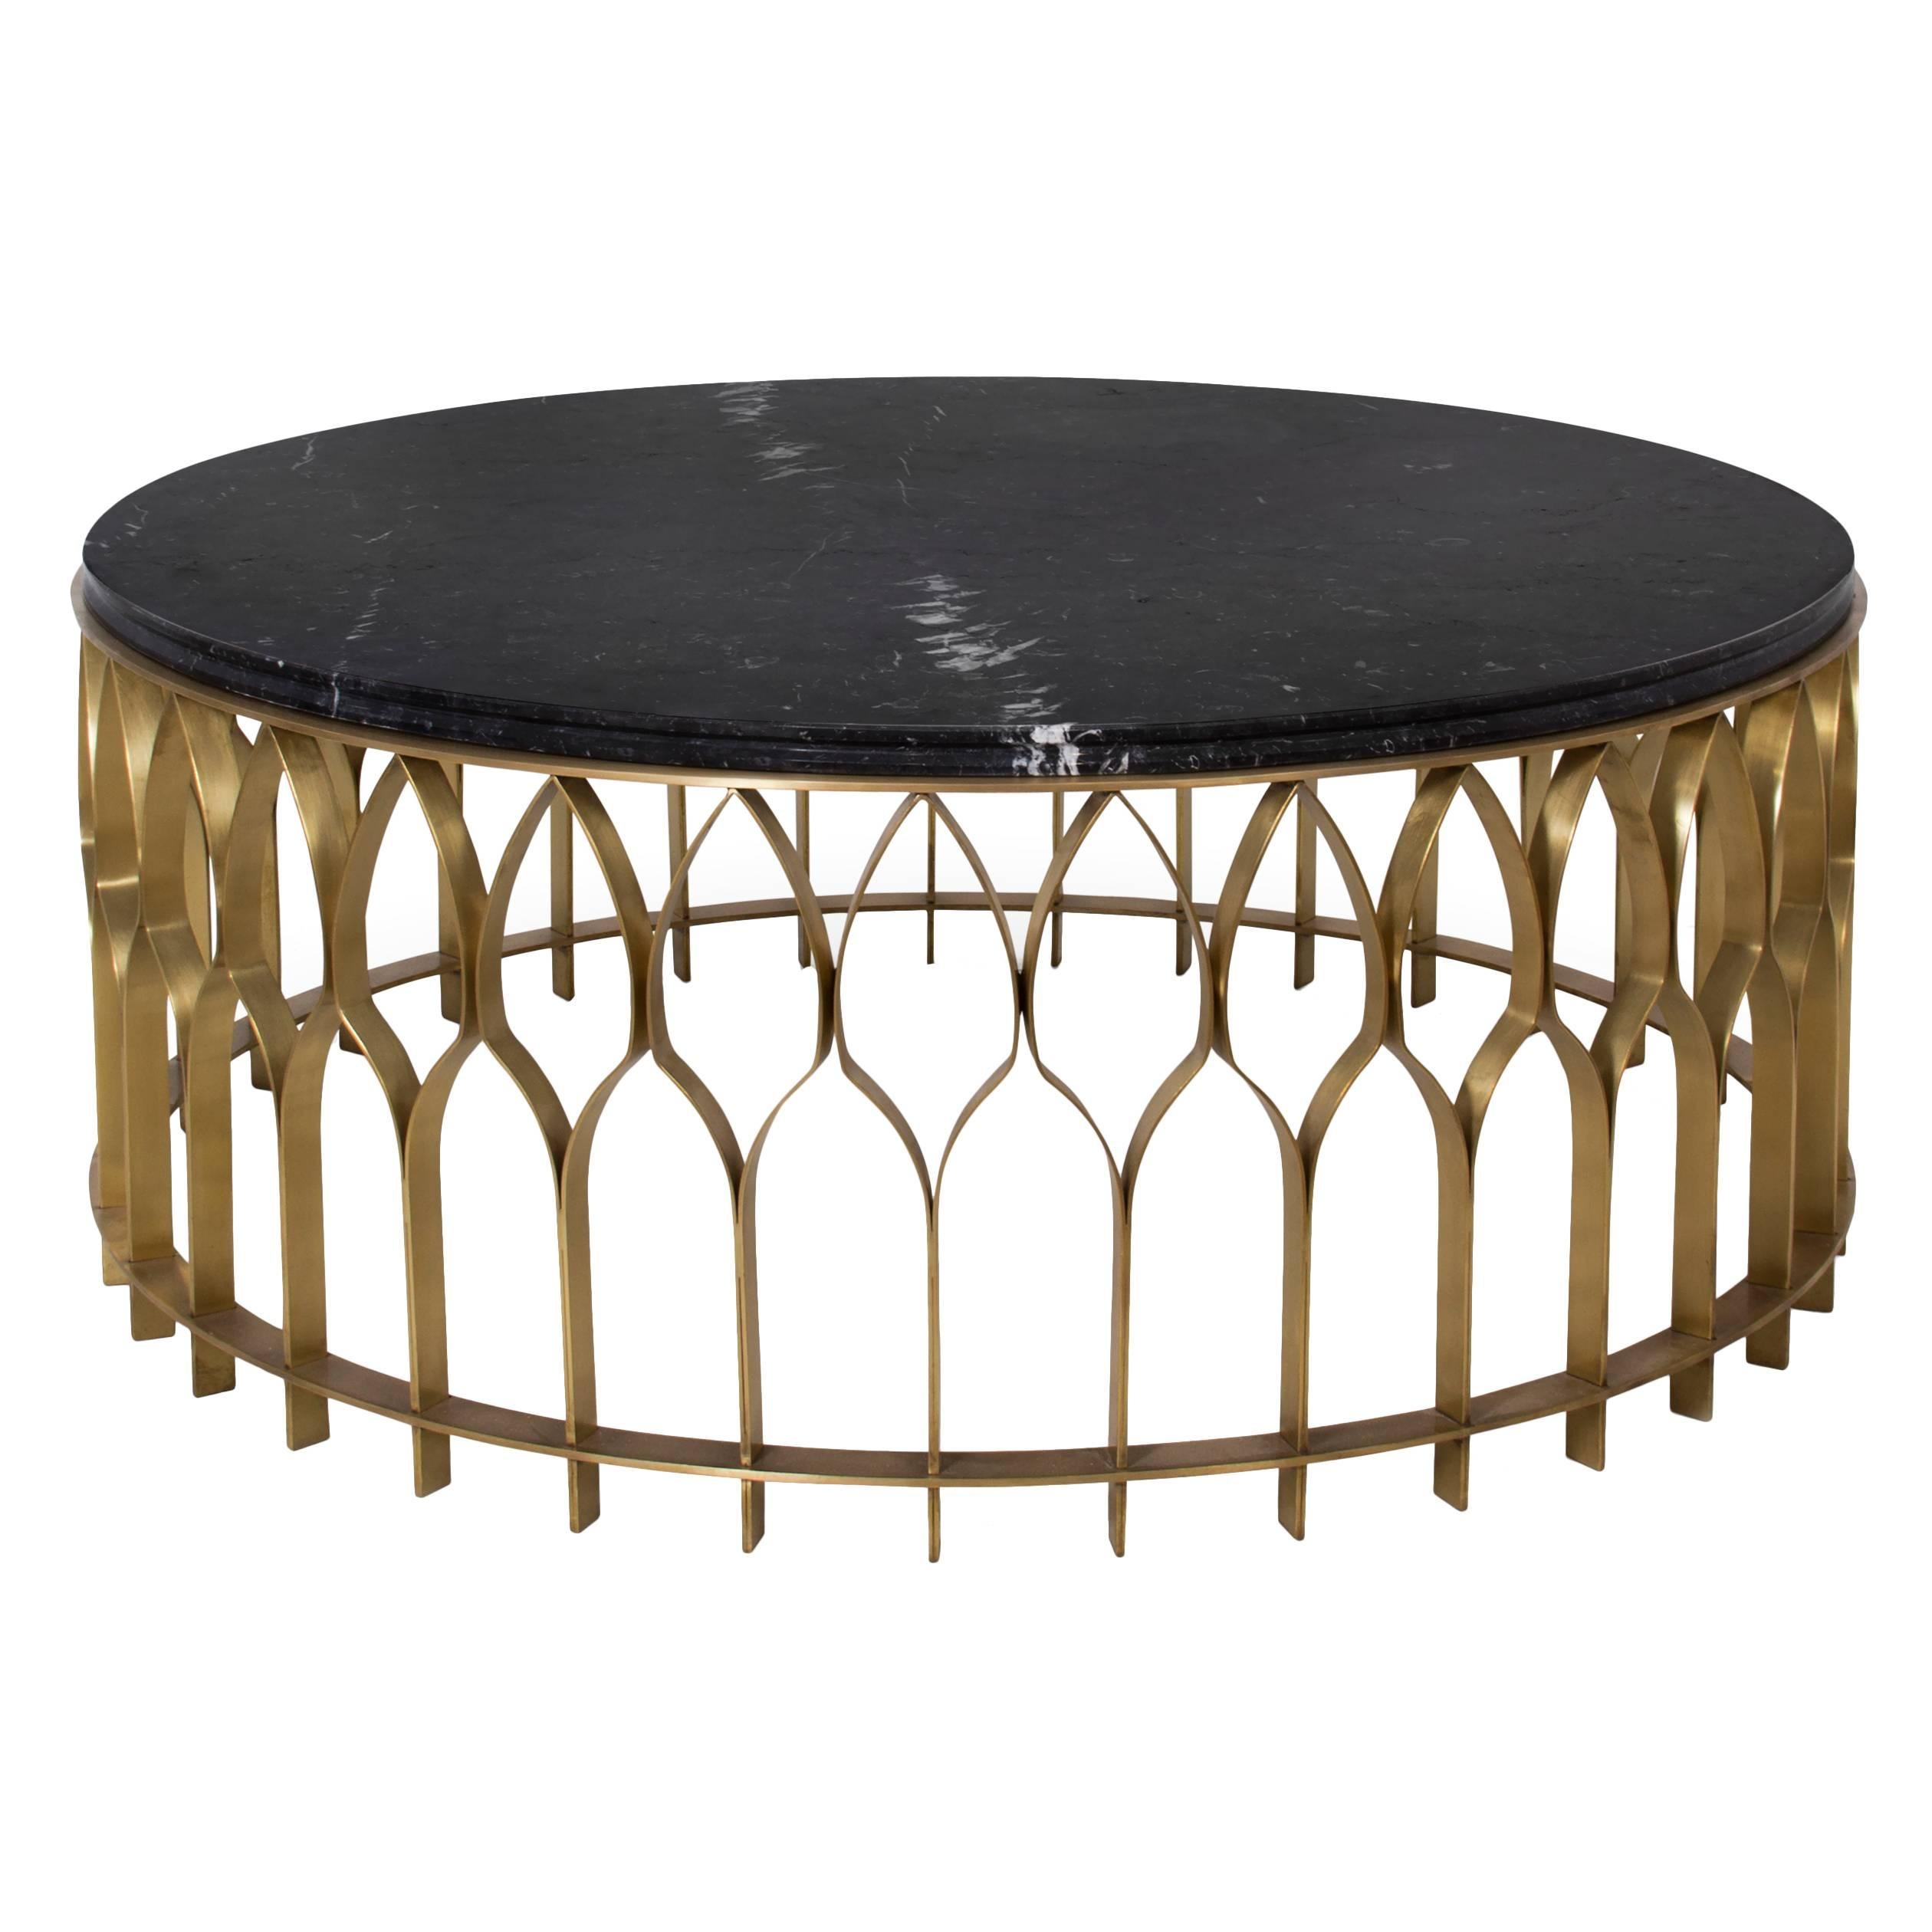 European modern Black Marble and Brushed Brass Round Coffee Table by Brabbu For Sale